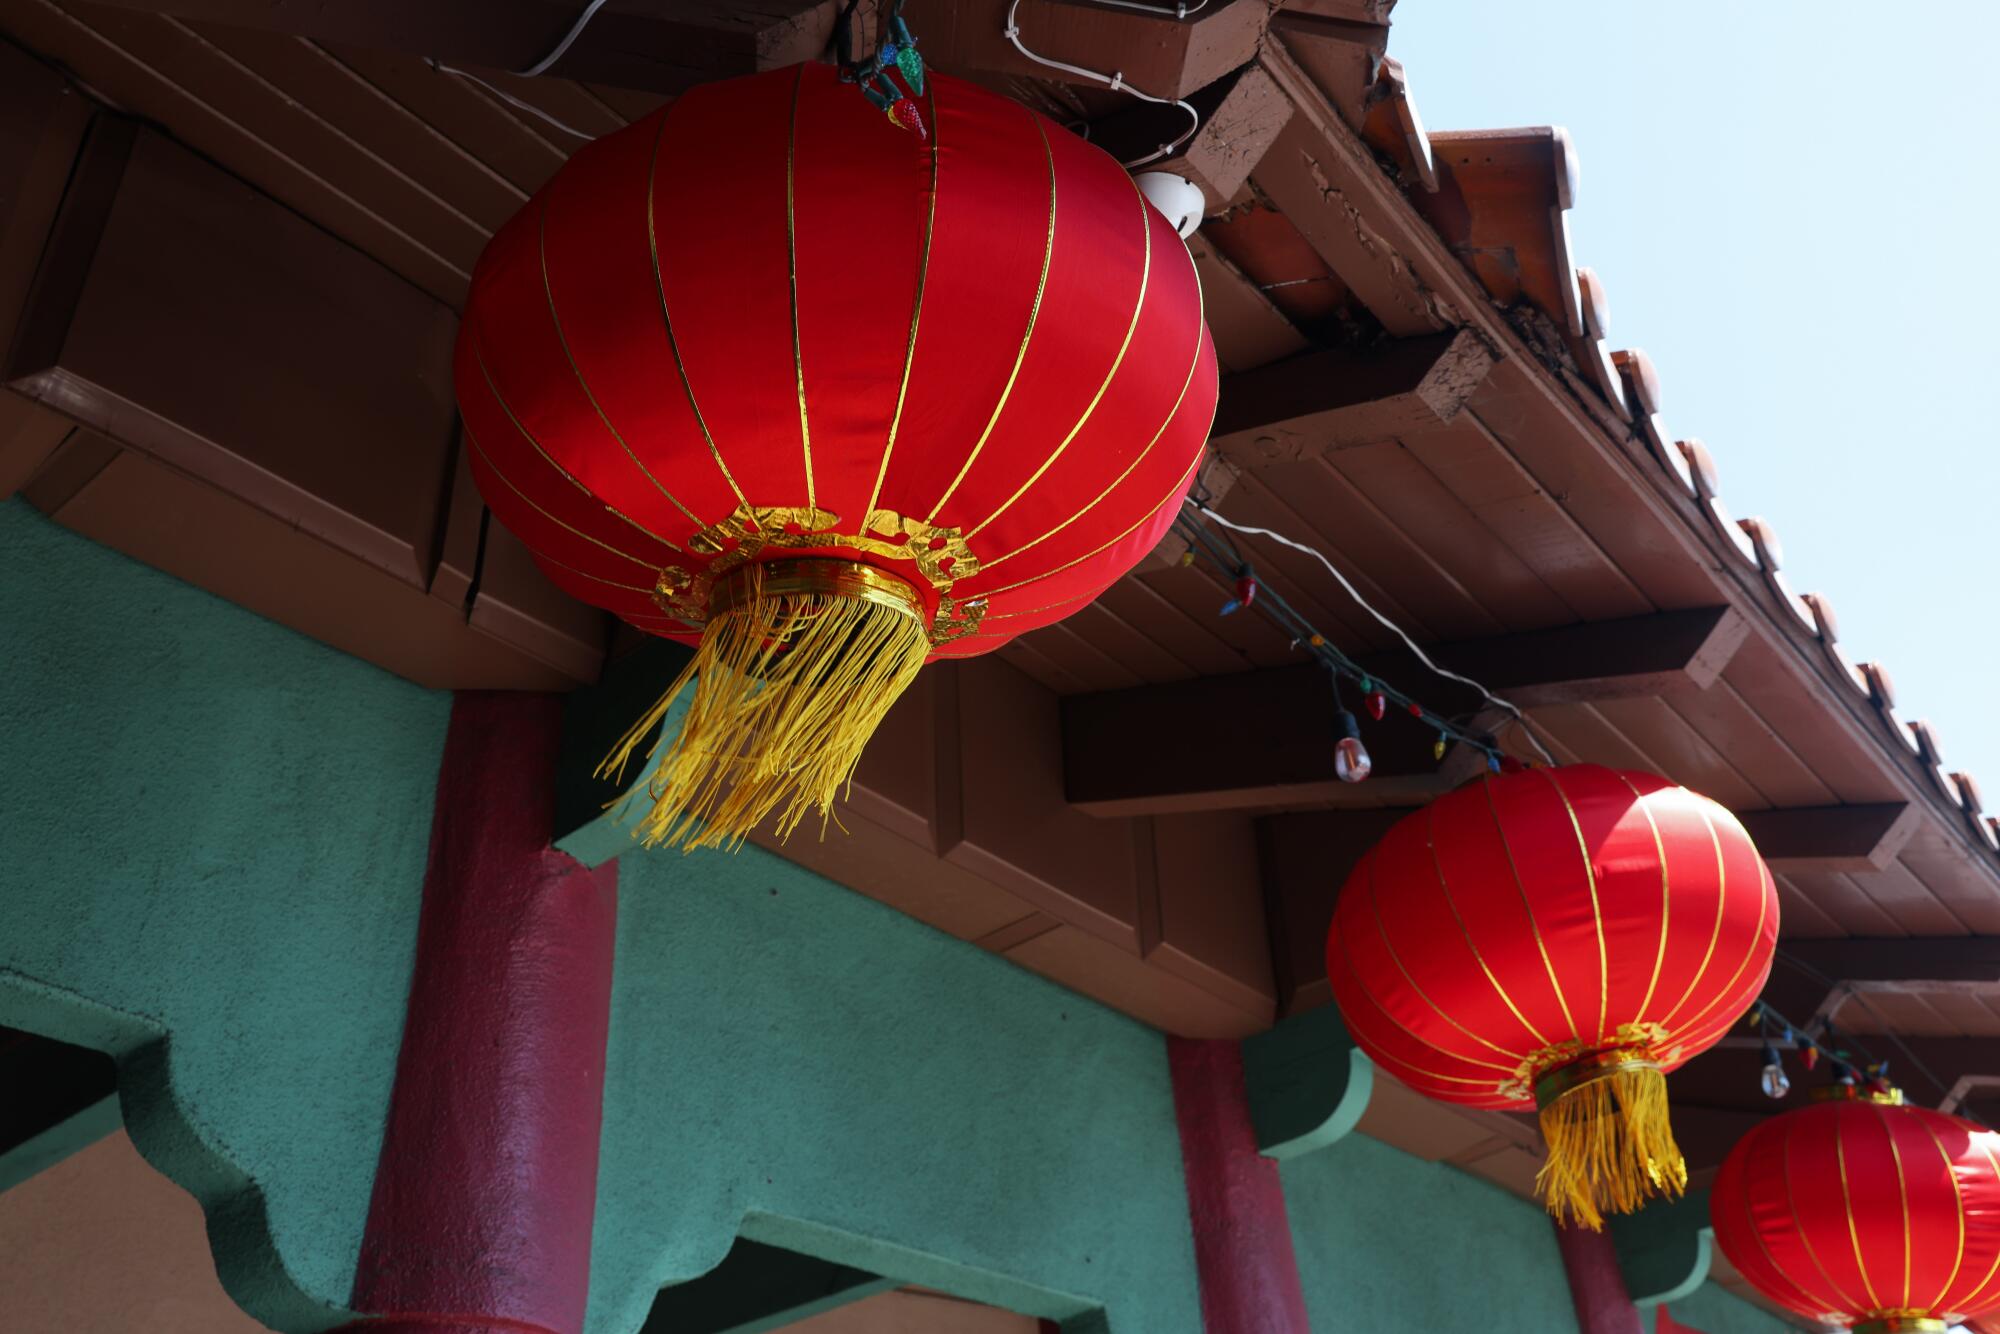 Lanterns decorate the South El Monte strip mall where Mei Xing and her partners ran the Garvey Therapy massage parlor.